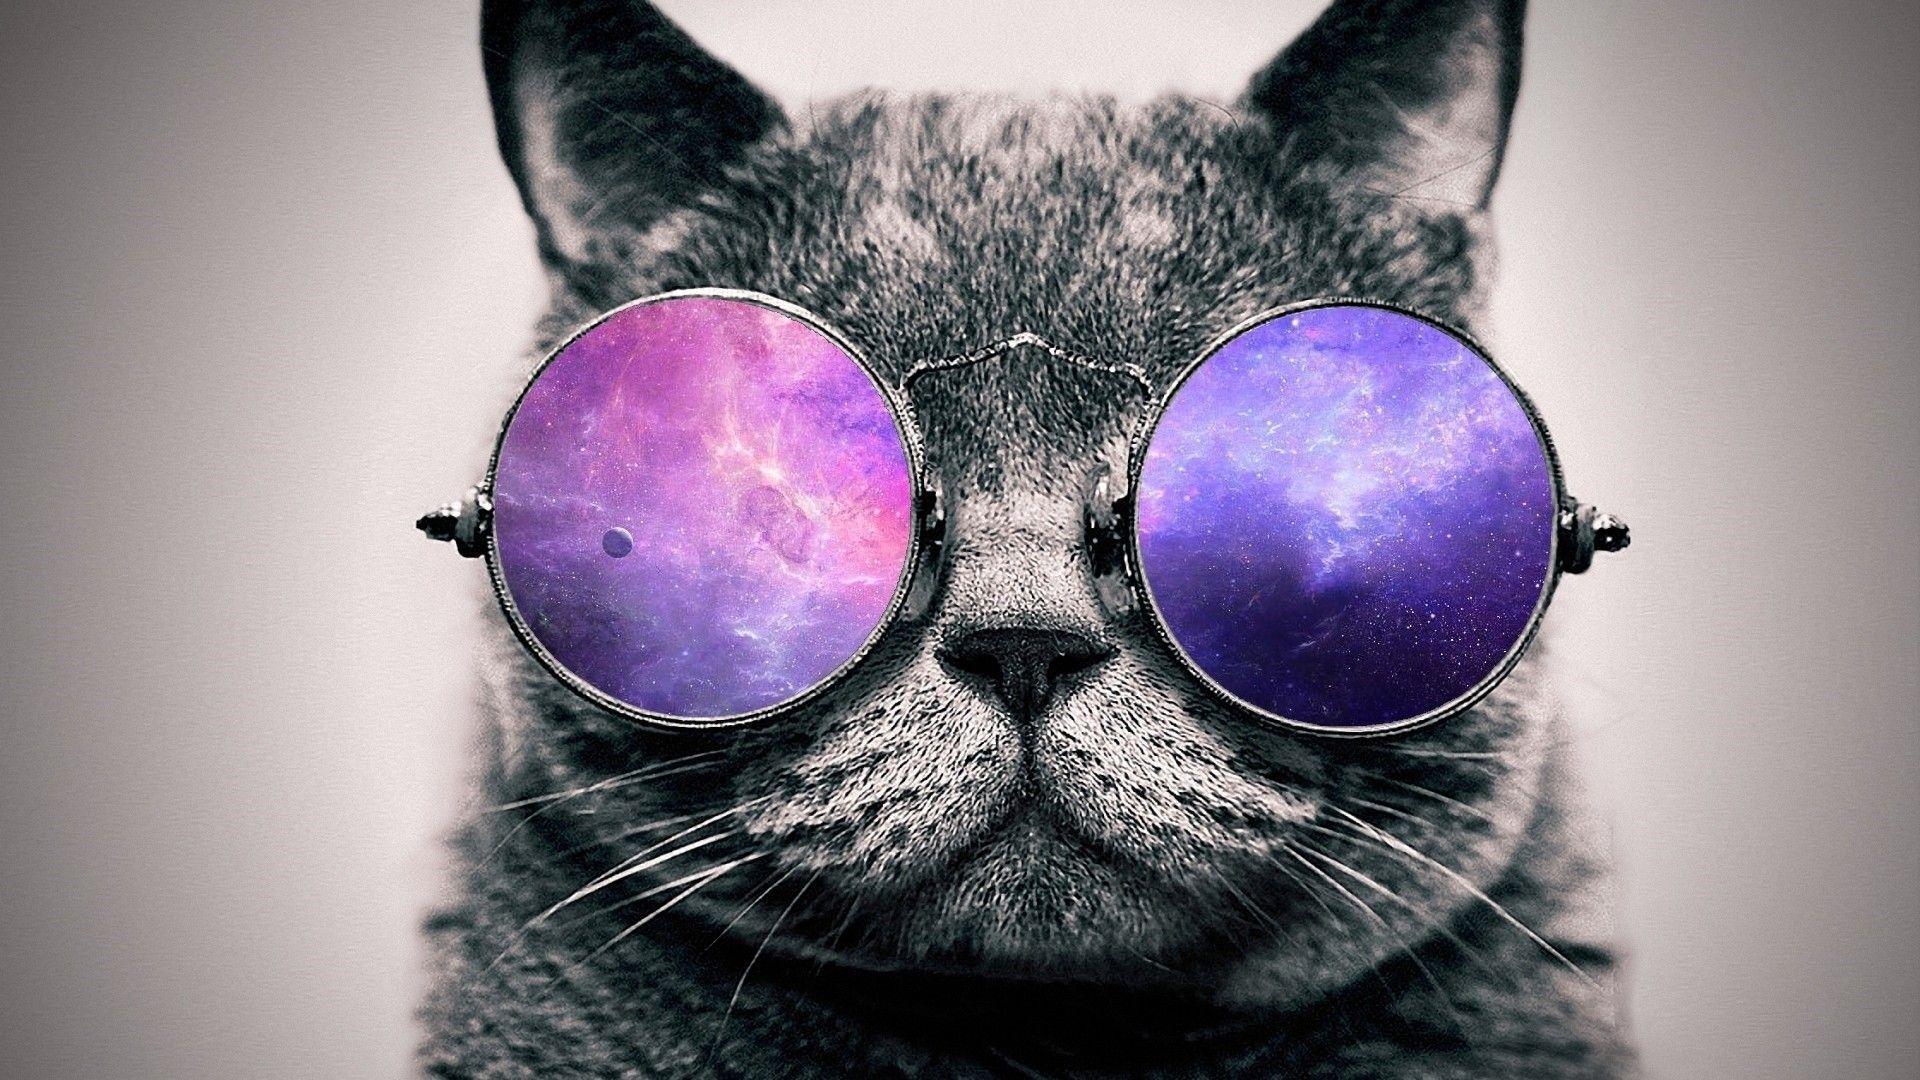 Cool Cat With Glasses 1080p Wallpaper HD Wallpaper 1920x1080 px